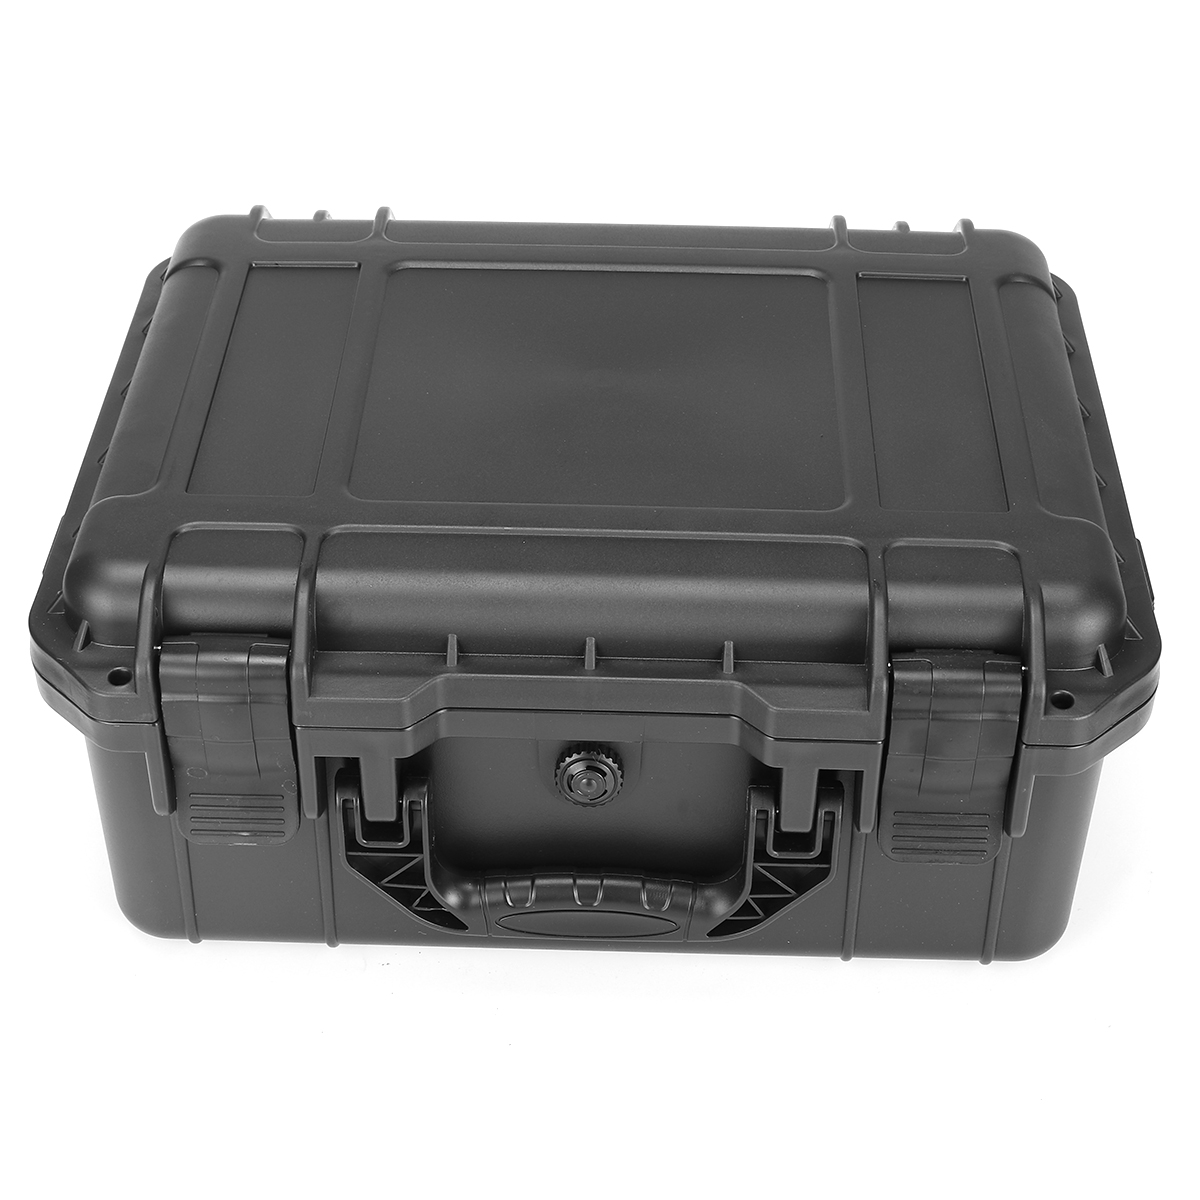 1PC-Shockproof-Sealed-Safety-Case-Toolbox-Airtight-Waterproof-Tool-Box-Instrument-Case-Dry-Box-with--1915433-9